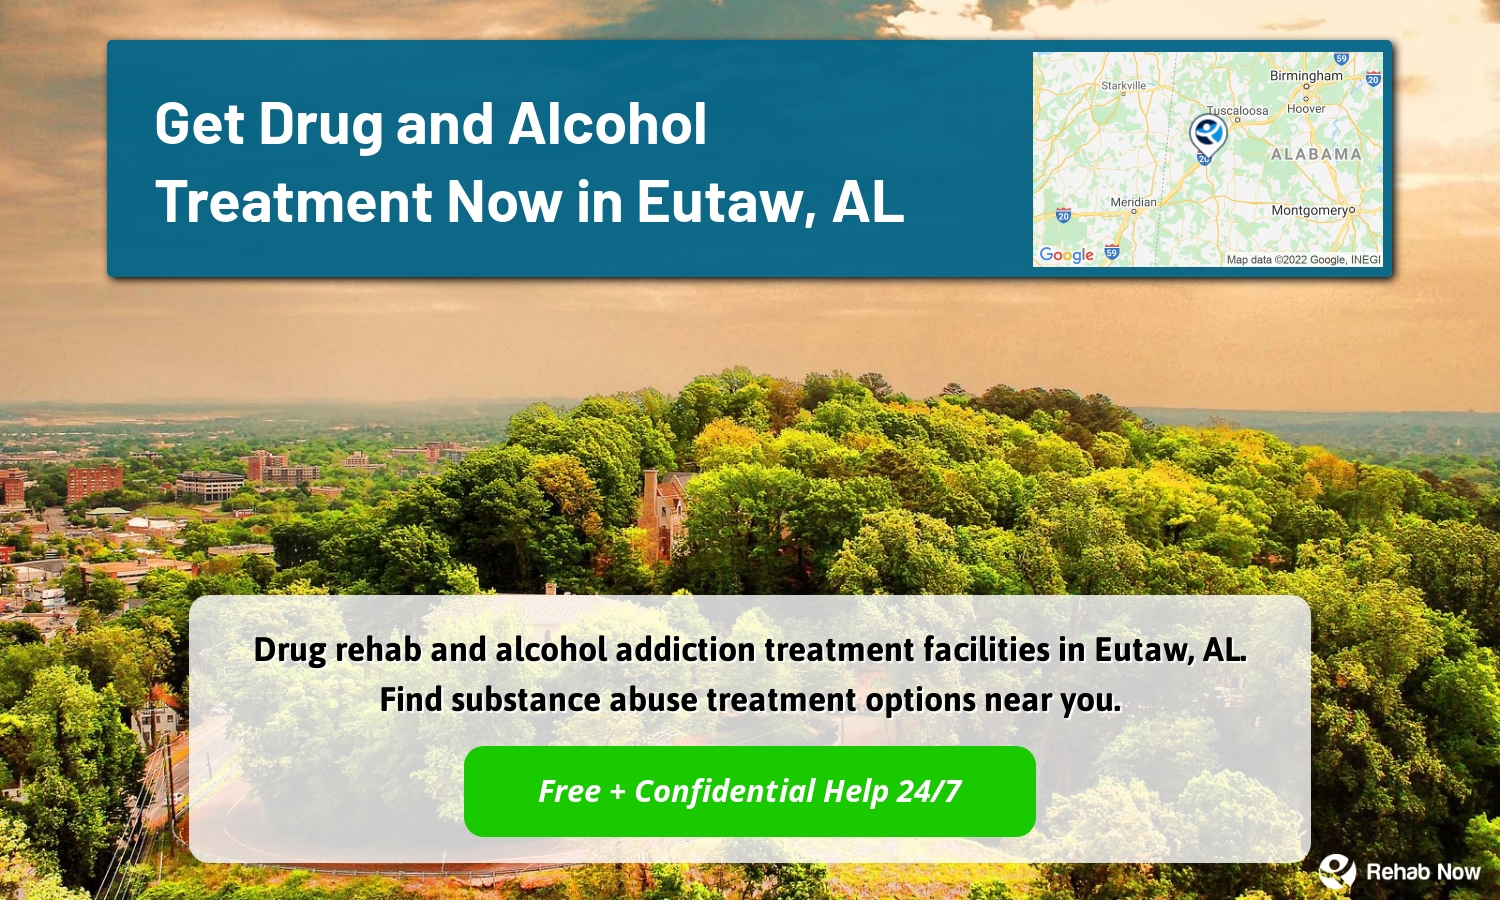 Drug rehab and alcohol addiction treatment facilities in Eutaw, AL. Find substance abuse treatment options near you.